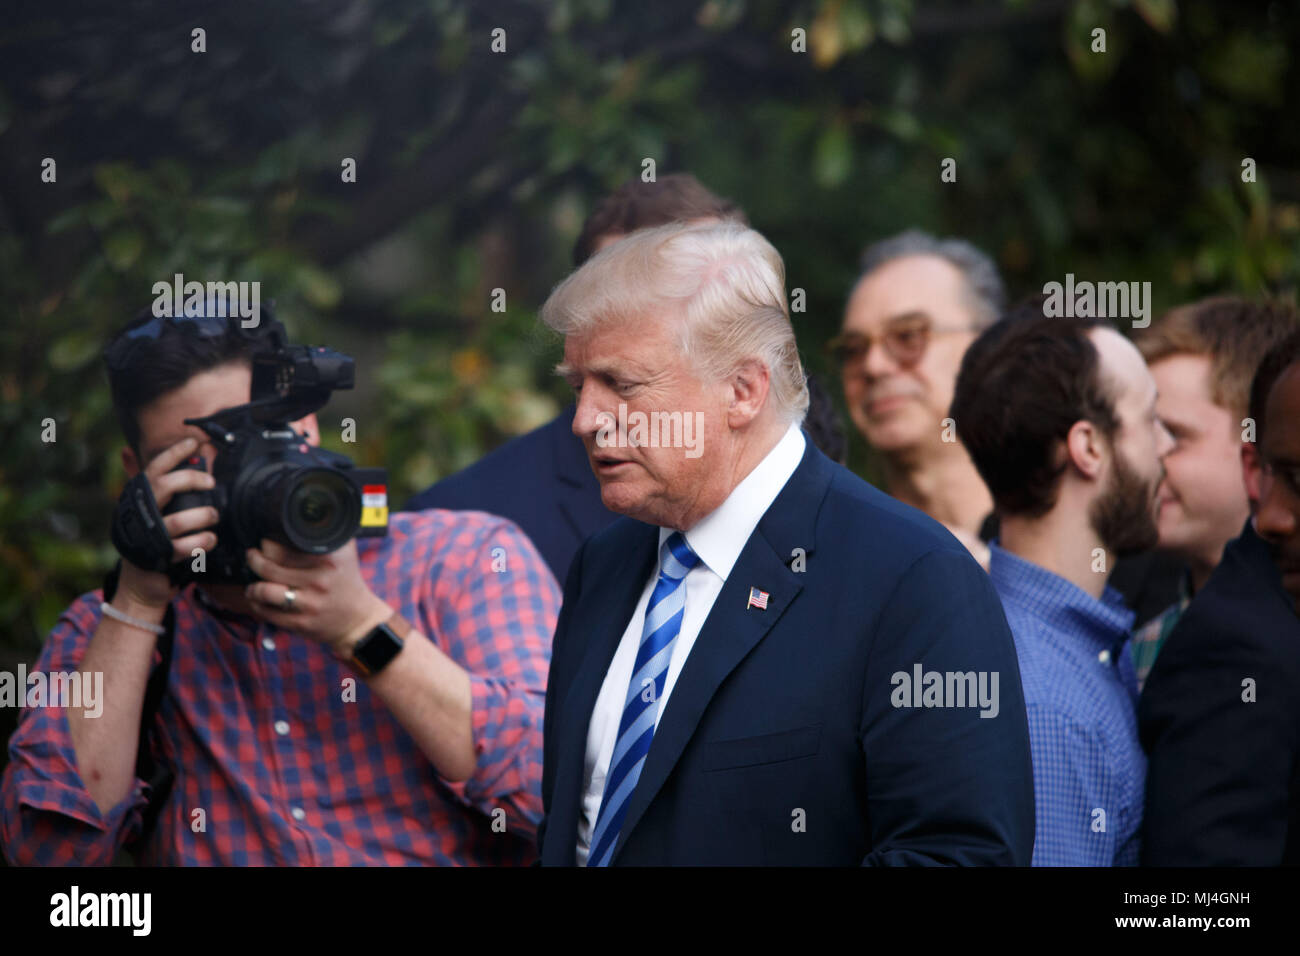 Washington, DC, USA. 4th May, 2018. President Donald Trump returns to the White House after traveling to Dallas for the NRA Leadership Forum. Credit: Michael Candelori/ZUMA Wire/Alamy Live News Stock Photo